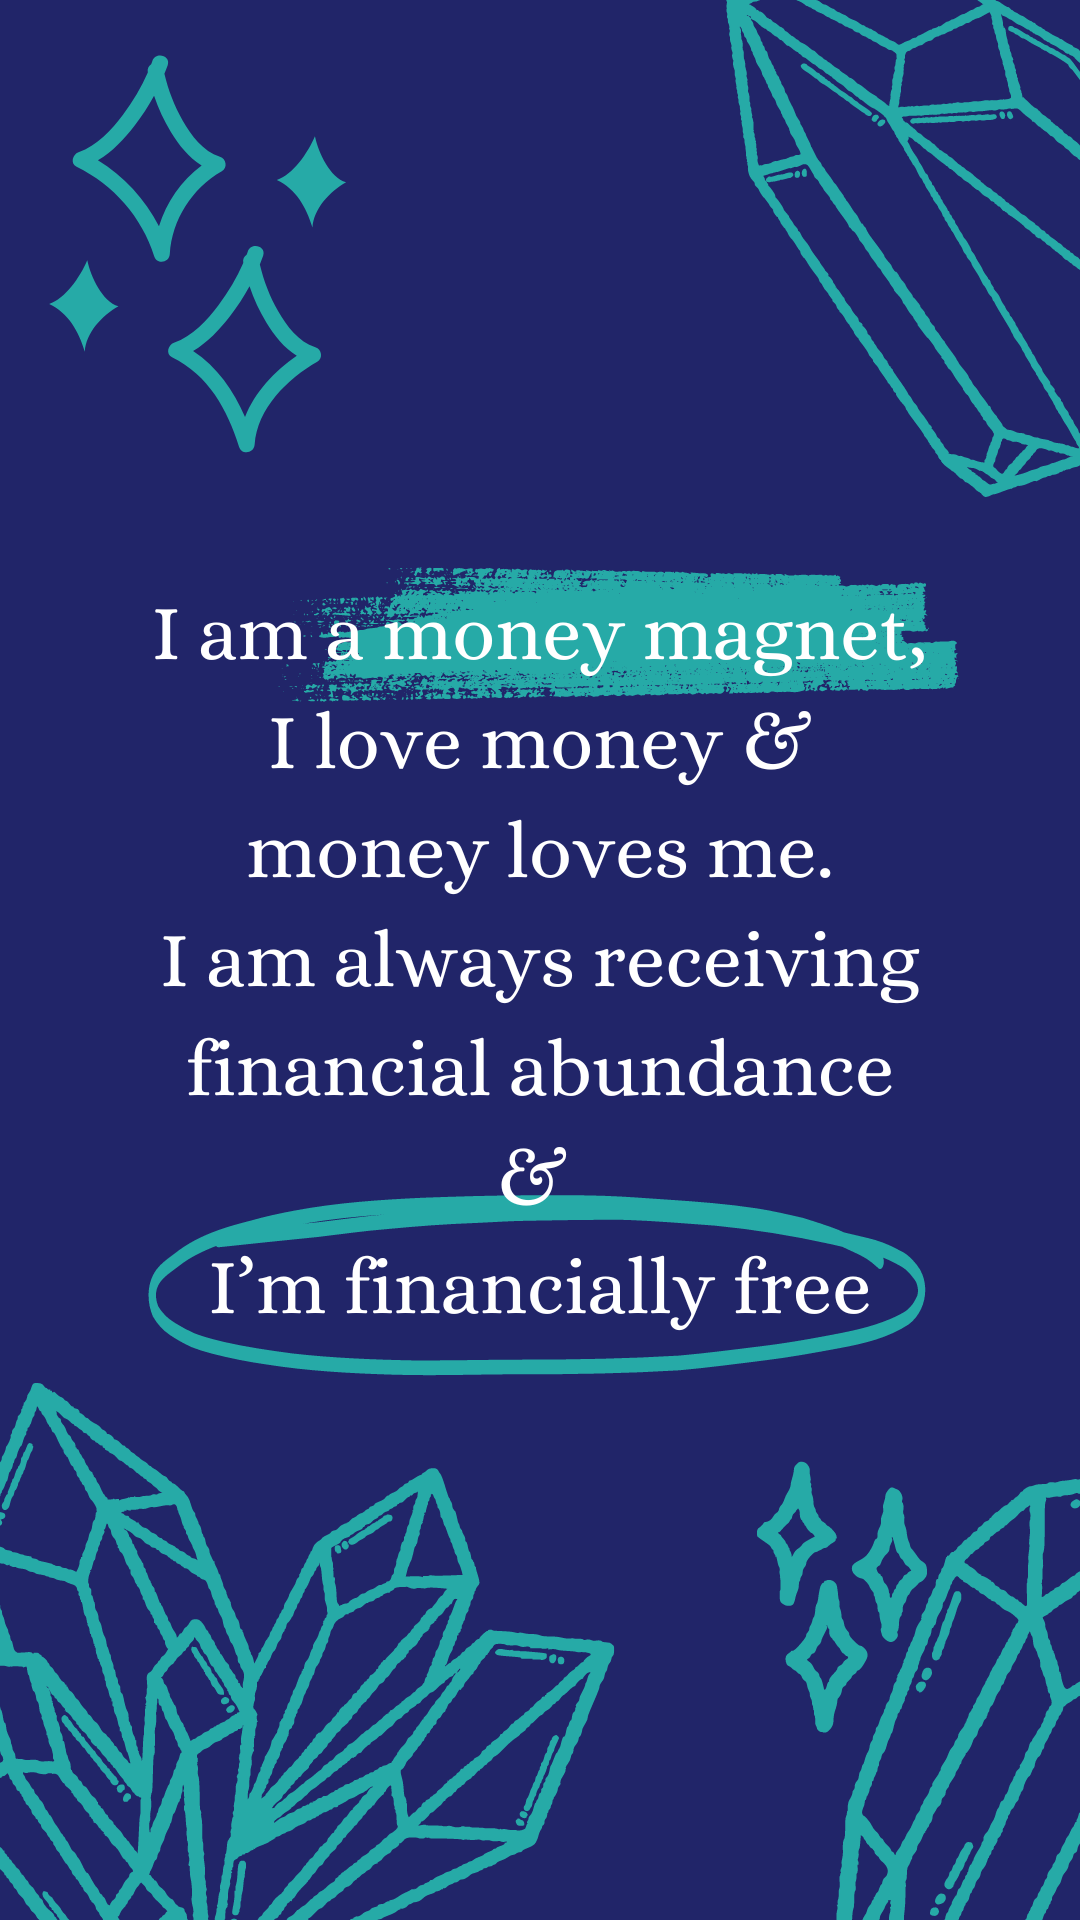 Blue background with green swirls artwork and phrase: I am a money magnet, I love money & money loves me. I am always receiving financial abundance &  I’m financially free